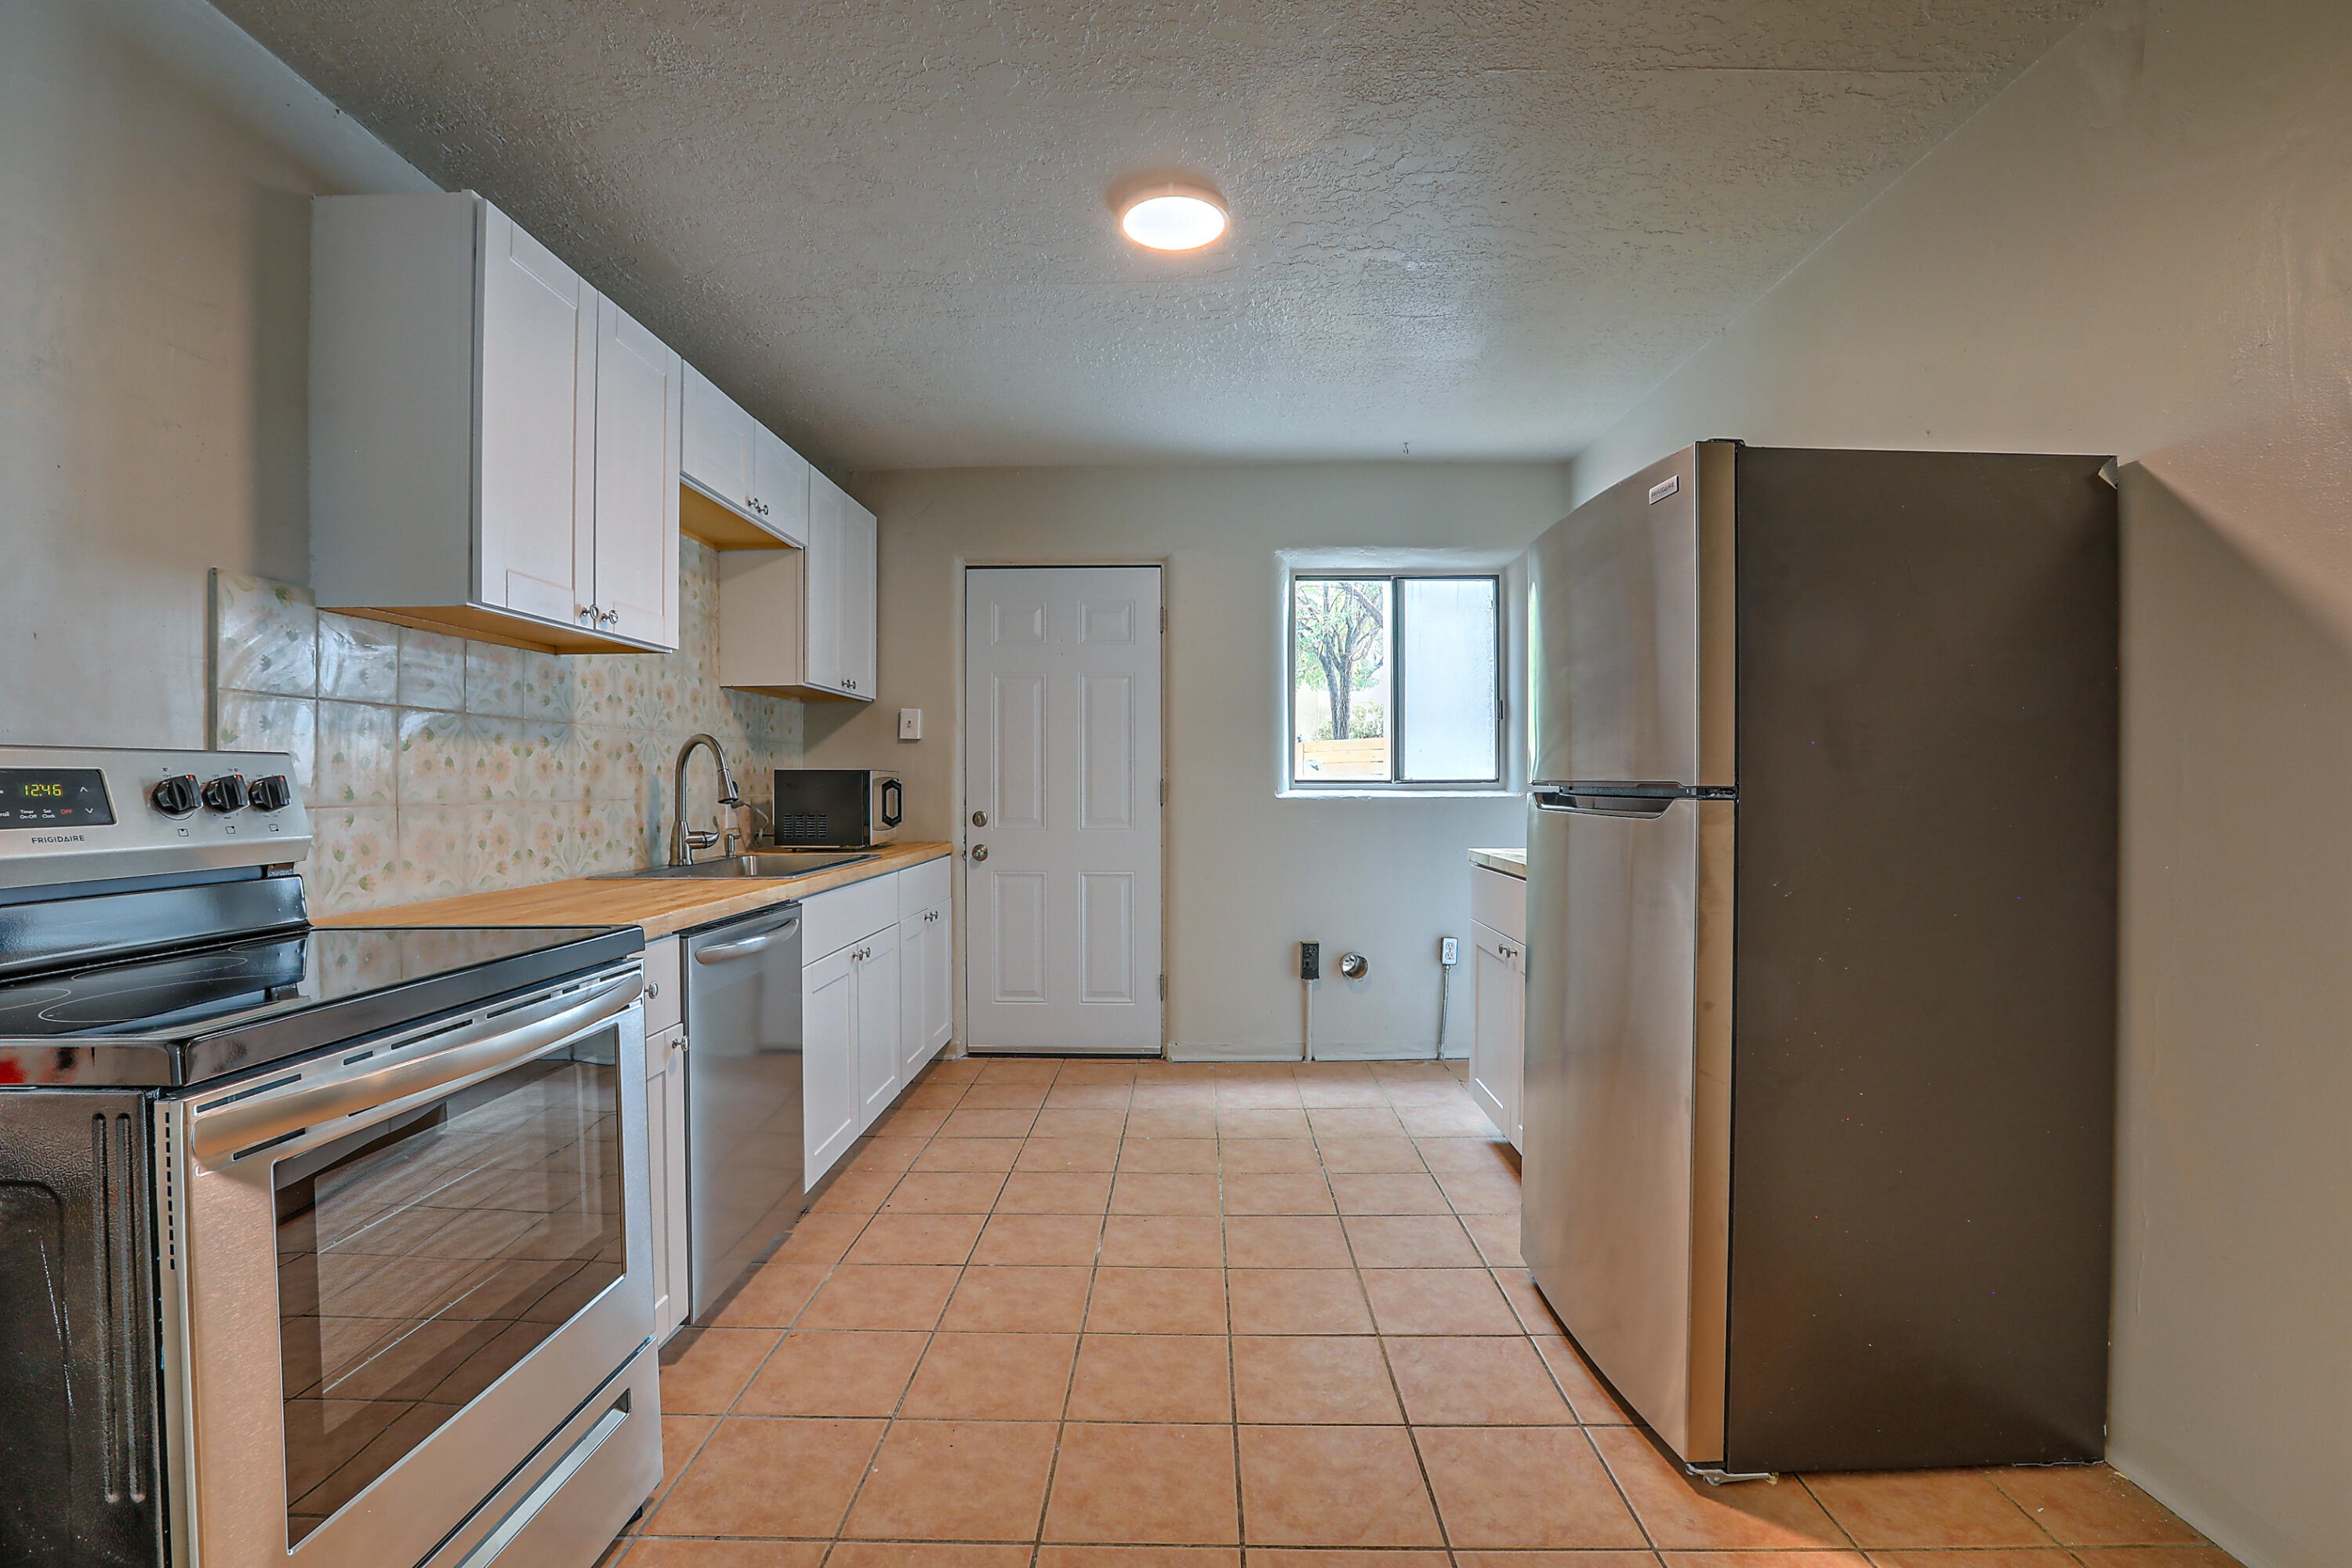 3901 Thaxton Avenue SE, Albuquerque, New Mexico 87108, 2 Bedrooms Bedrooms, ,1 BathroomBathrooms,Residential Income,For Sale,3901 Thaxton Avenue SE,1059398